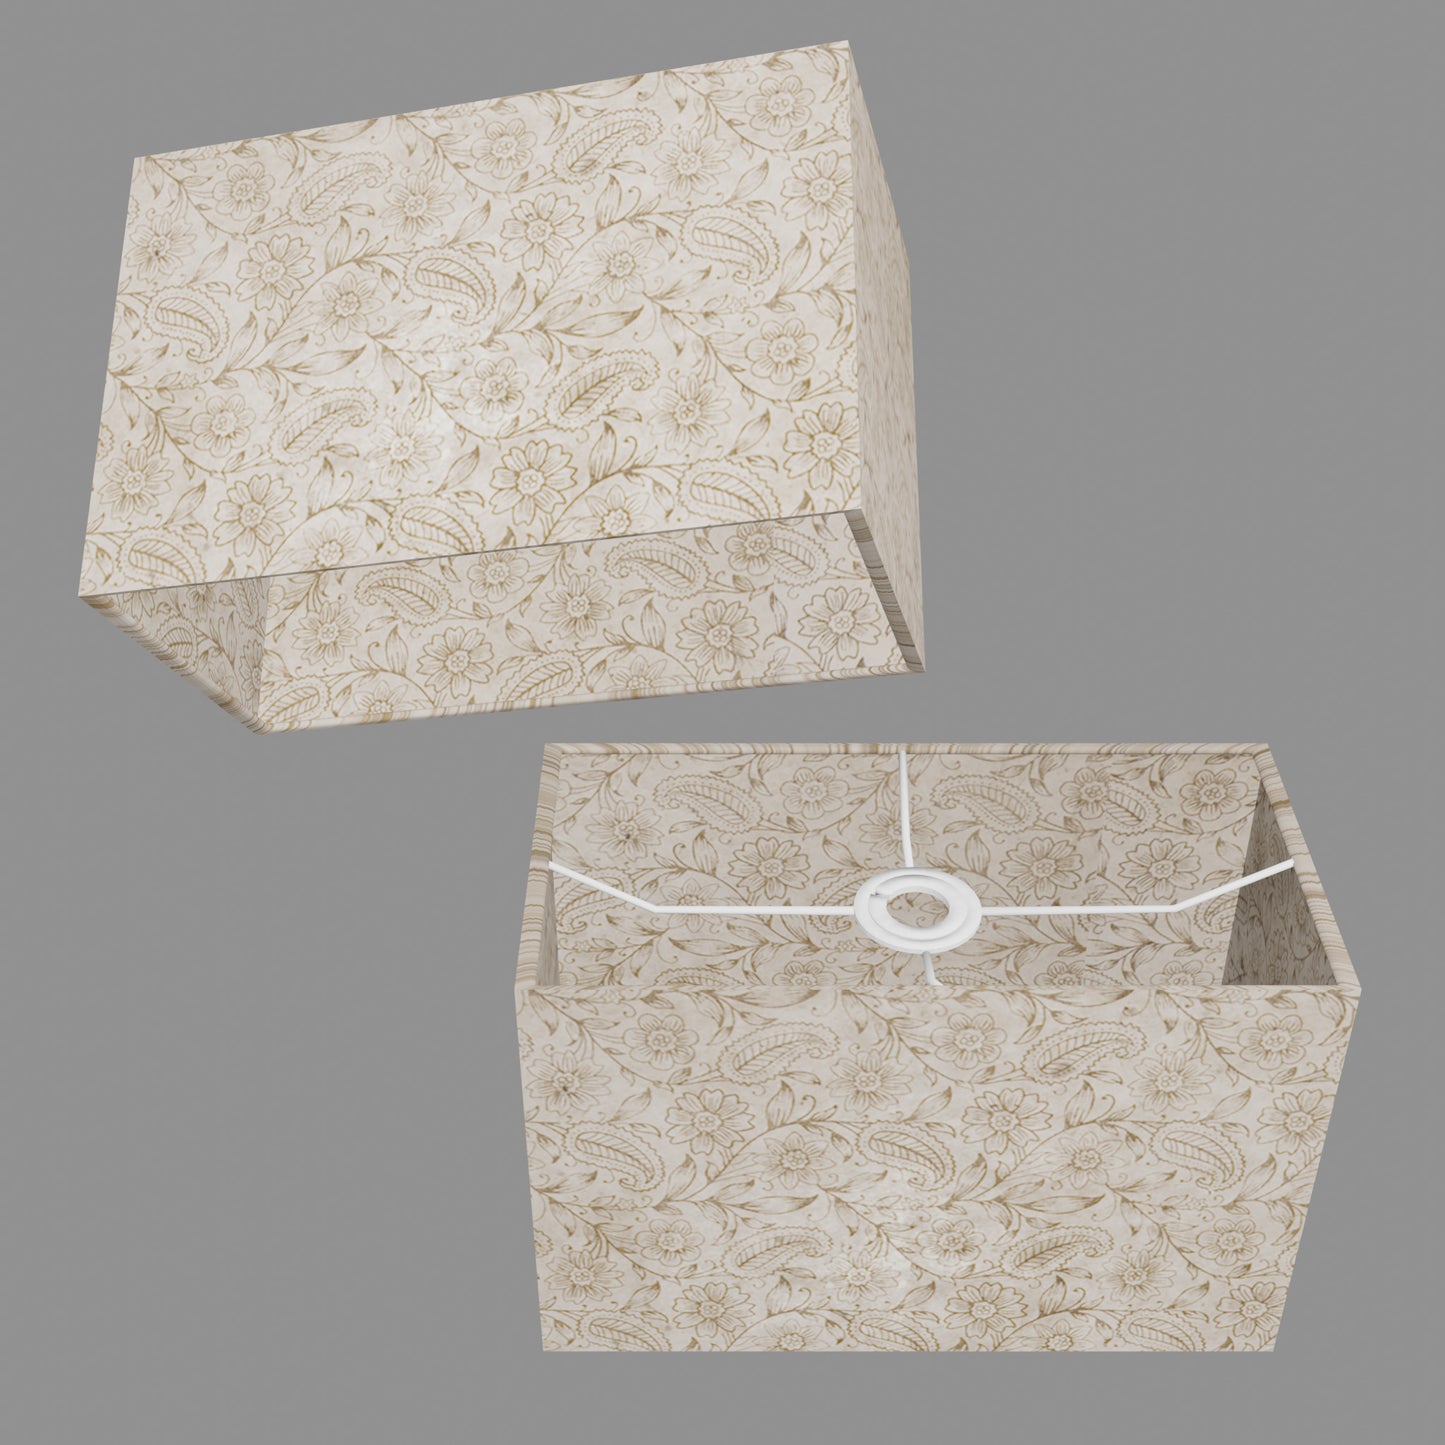 Rectangle Lamp Shade - P69 - Garden Gold on Natural, 30cm(w) x 20cm(h) x 15cm(d)